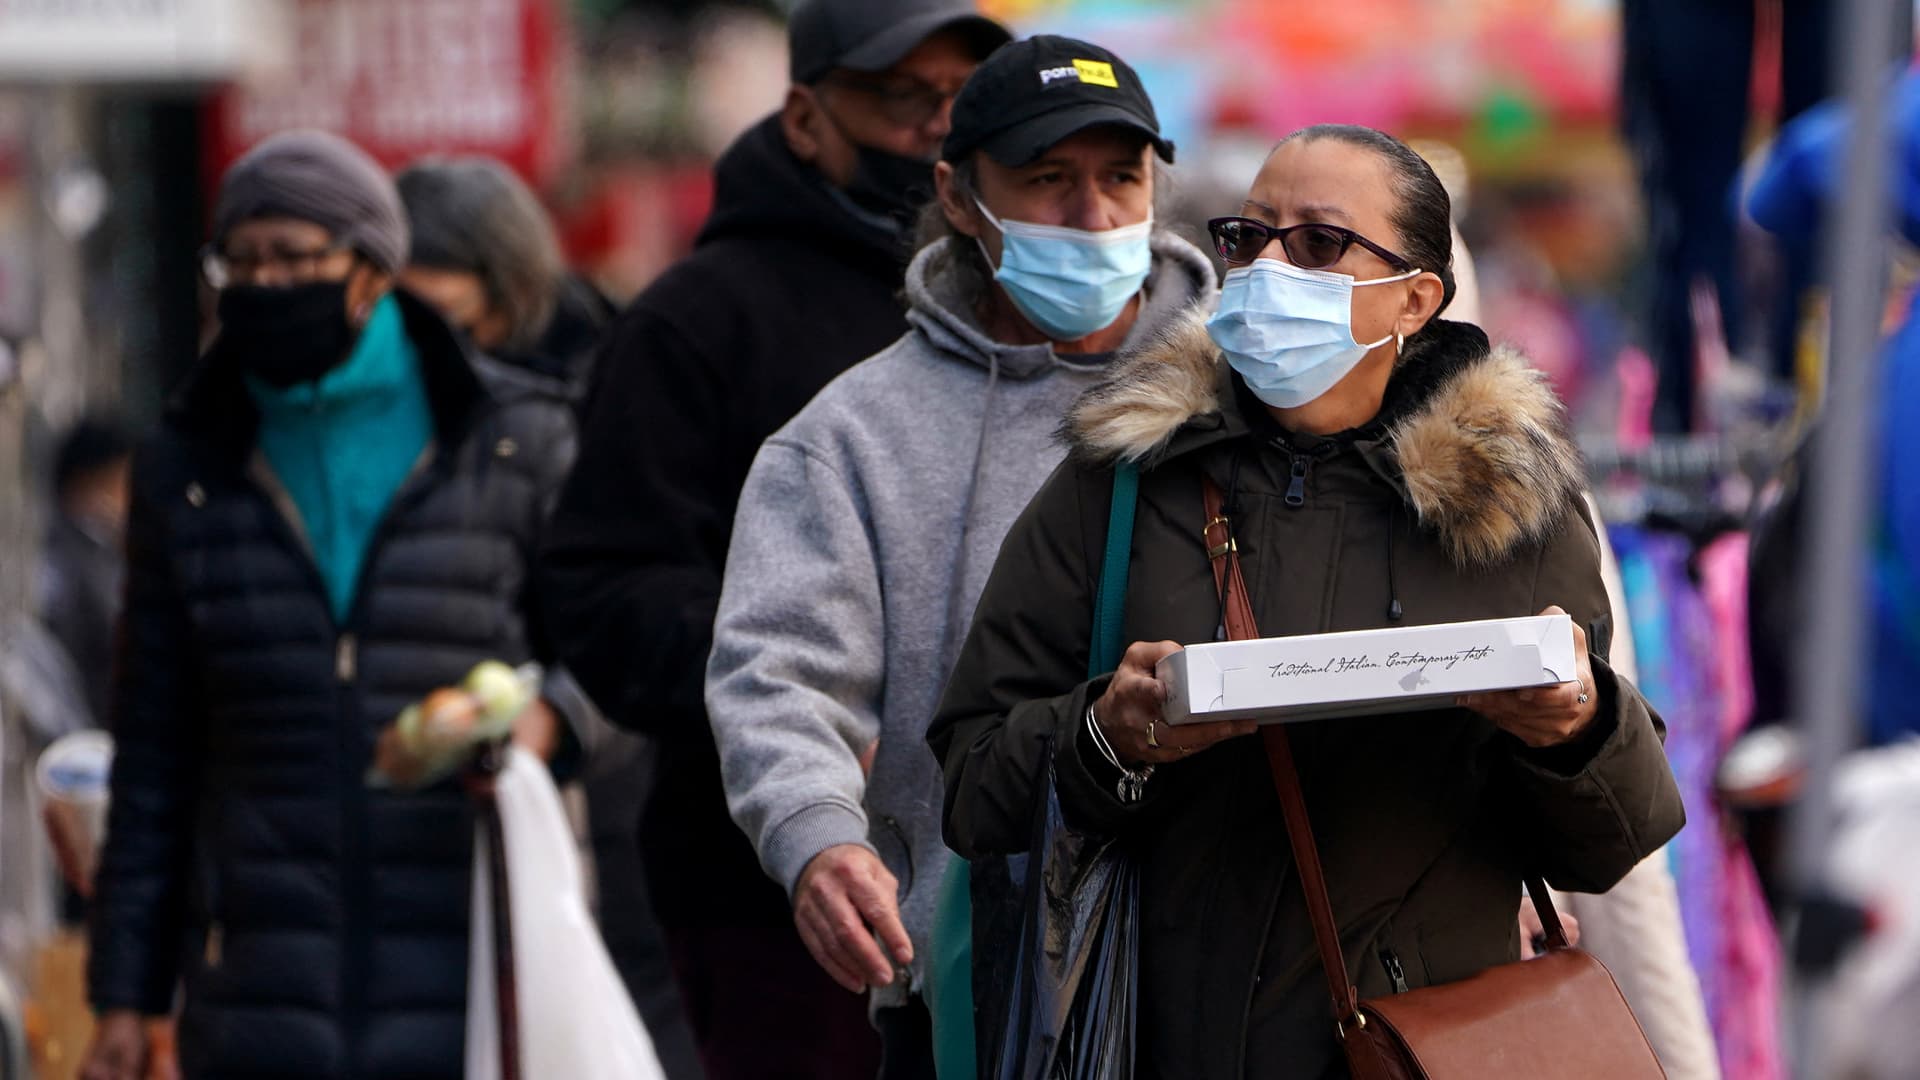 People walk outside wearing masks during the coronavirus disease (COVID-19) pandemic in the Harlem area of the Manhattan borough of New York City, New York, February 10, 2022.